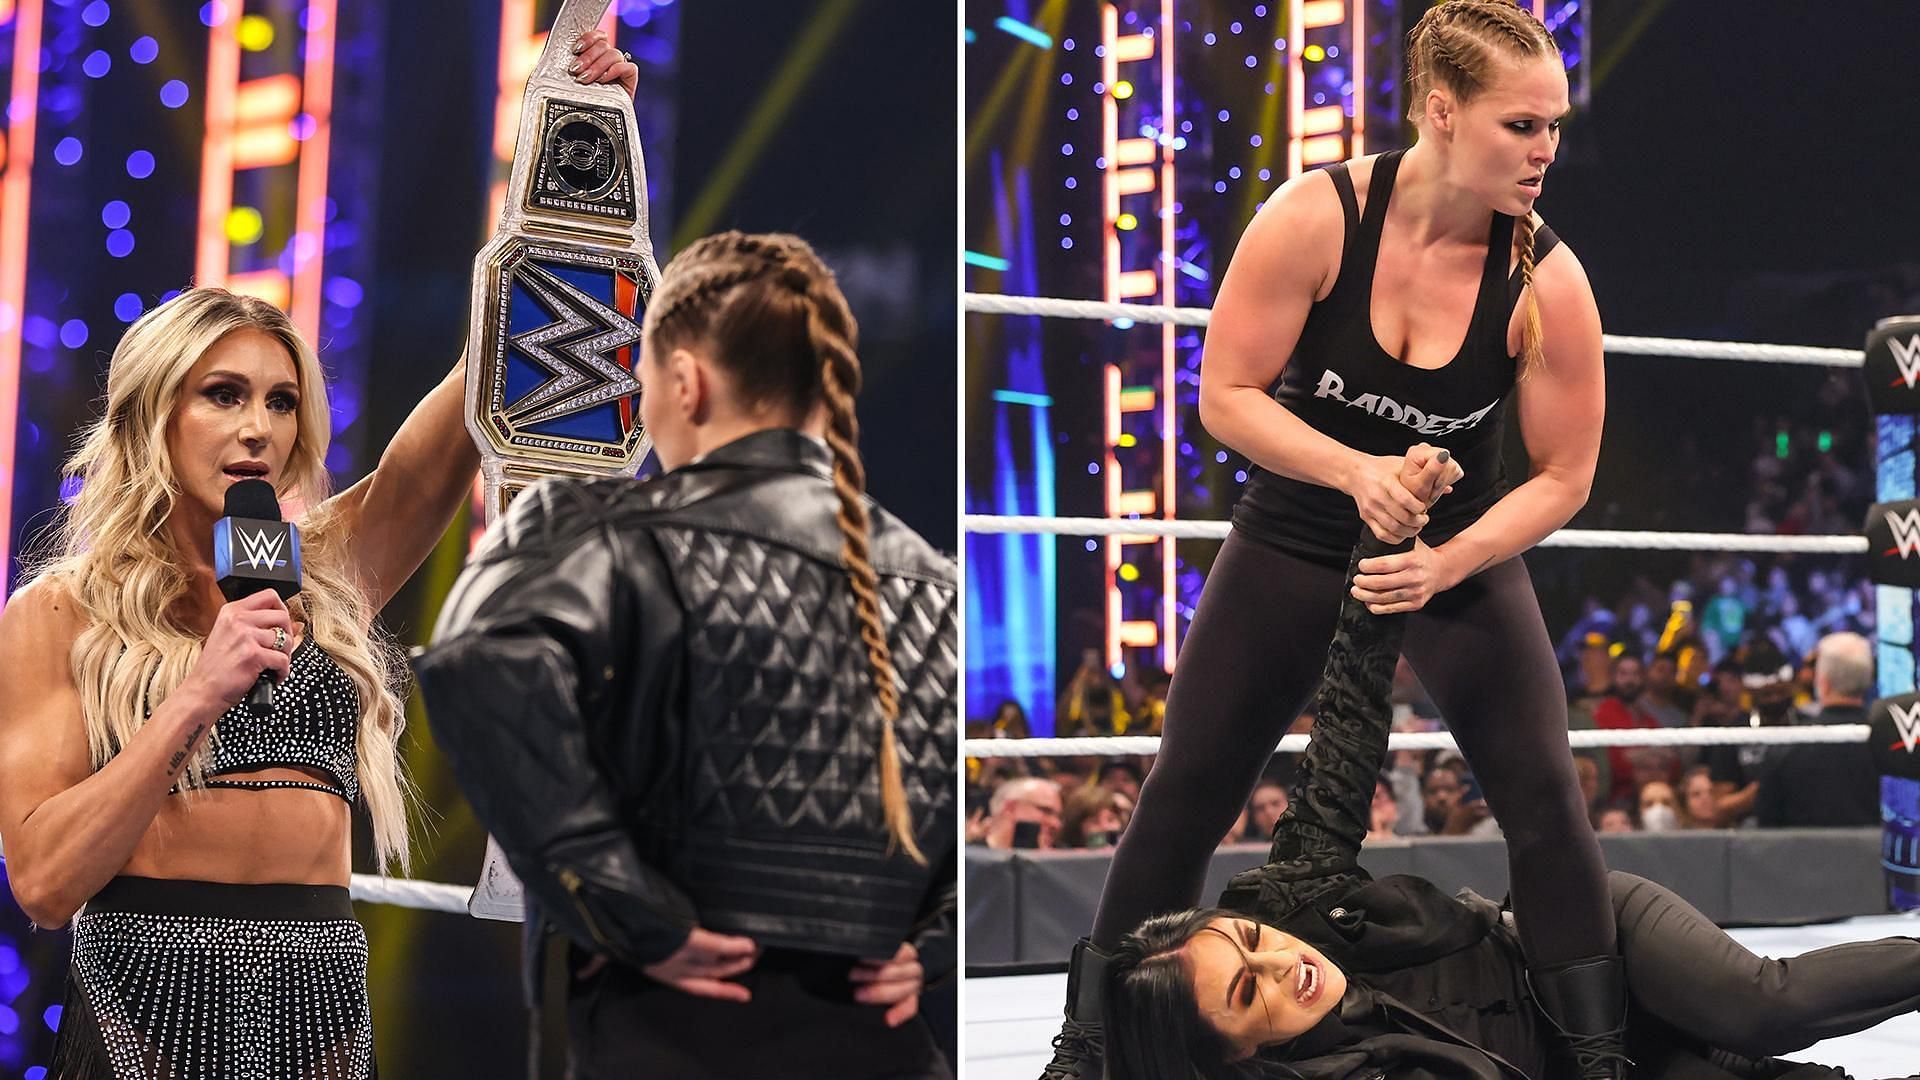 Women&#039;s WWE Royal Rumble winner Ronda Rousey visited both RAW and SmackDown this week